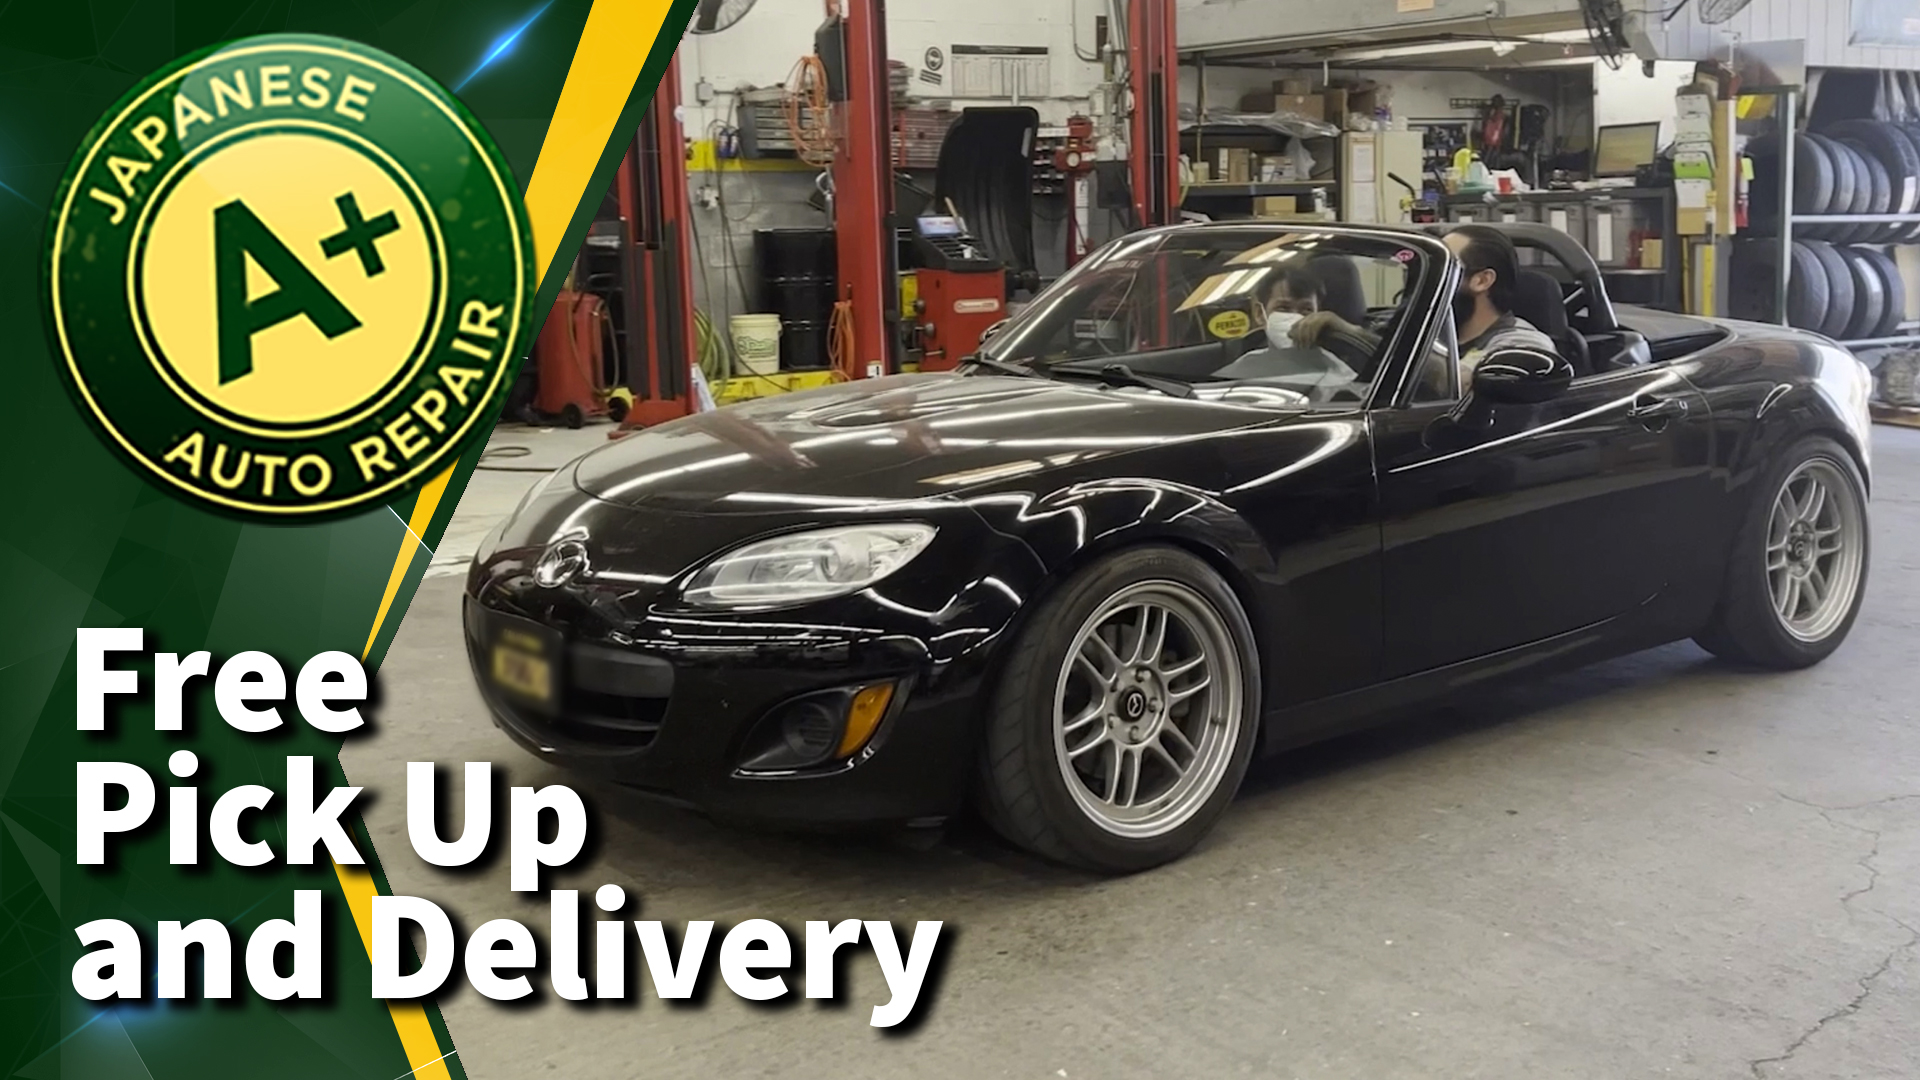 Free Pick-Up and Delivery for your Next Service if you Make An Appointment!